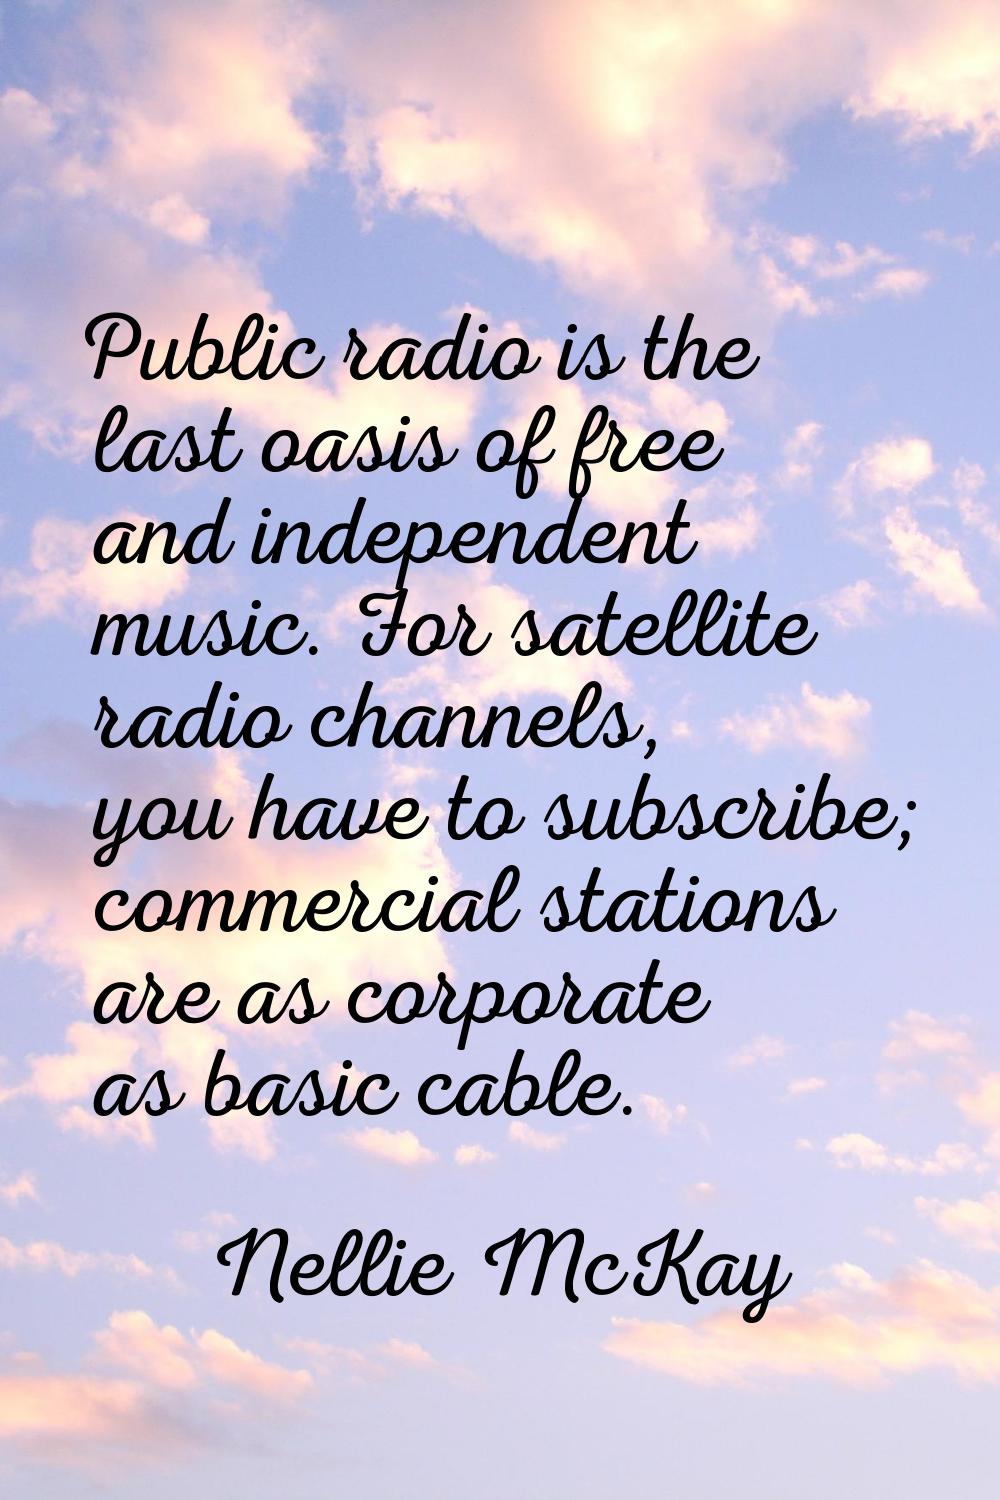 Public radio is the last oasis of free and independent music. For satellite radio channels, you hav